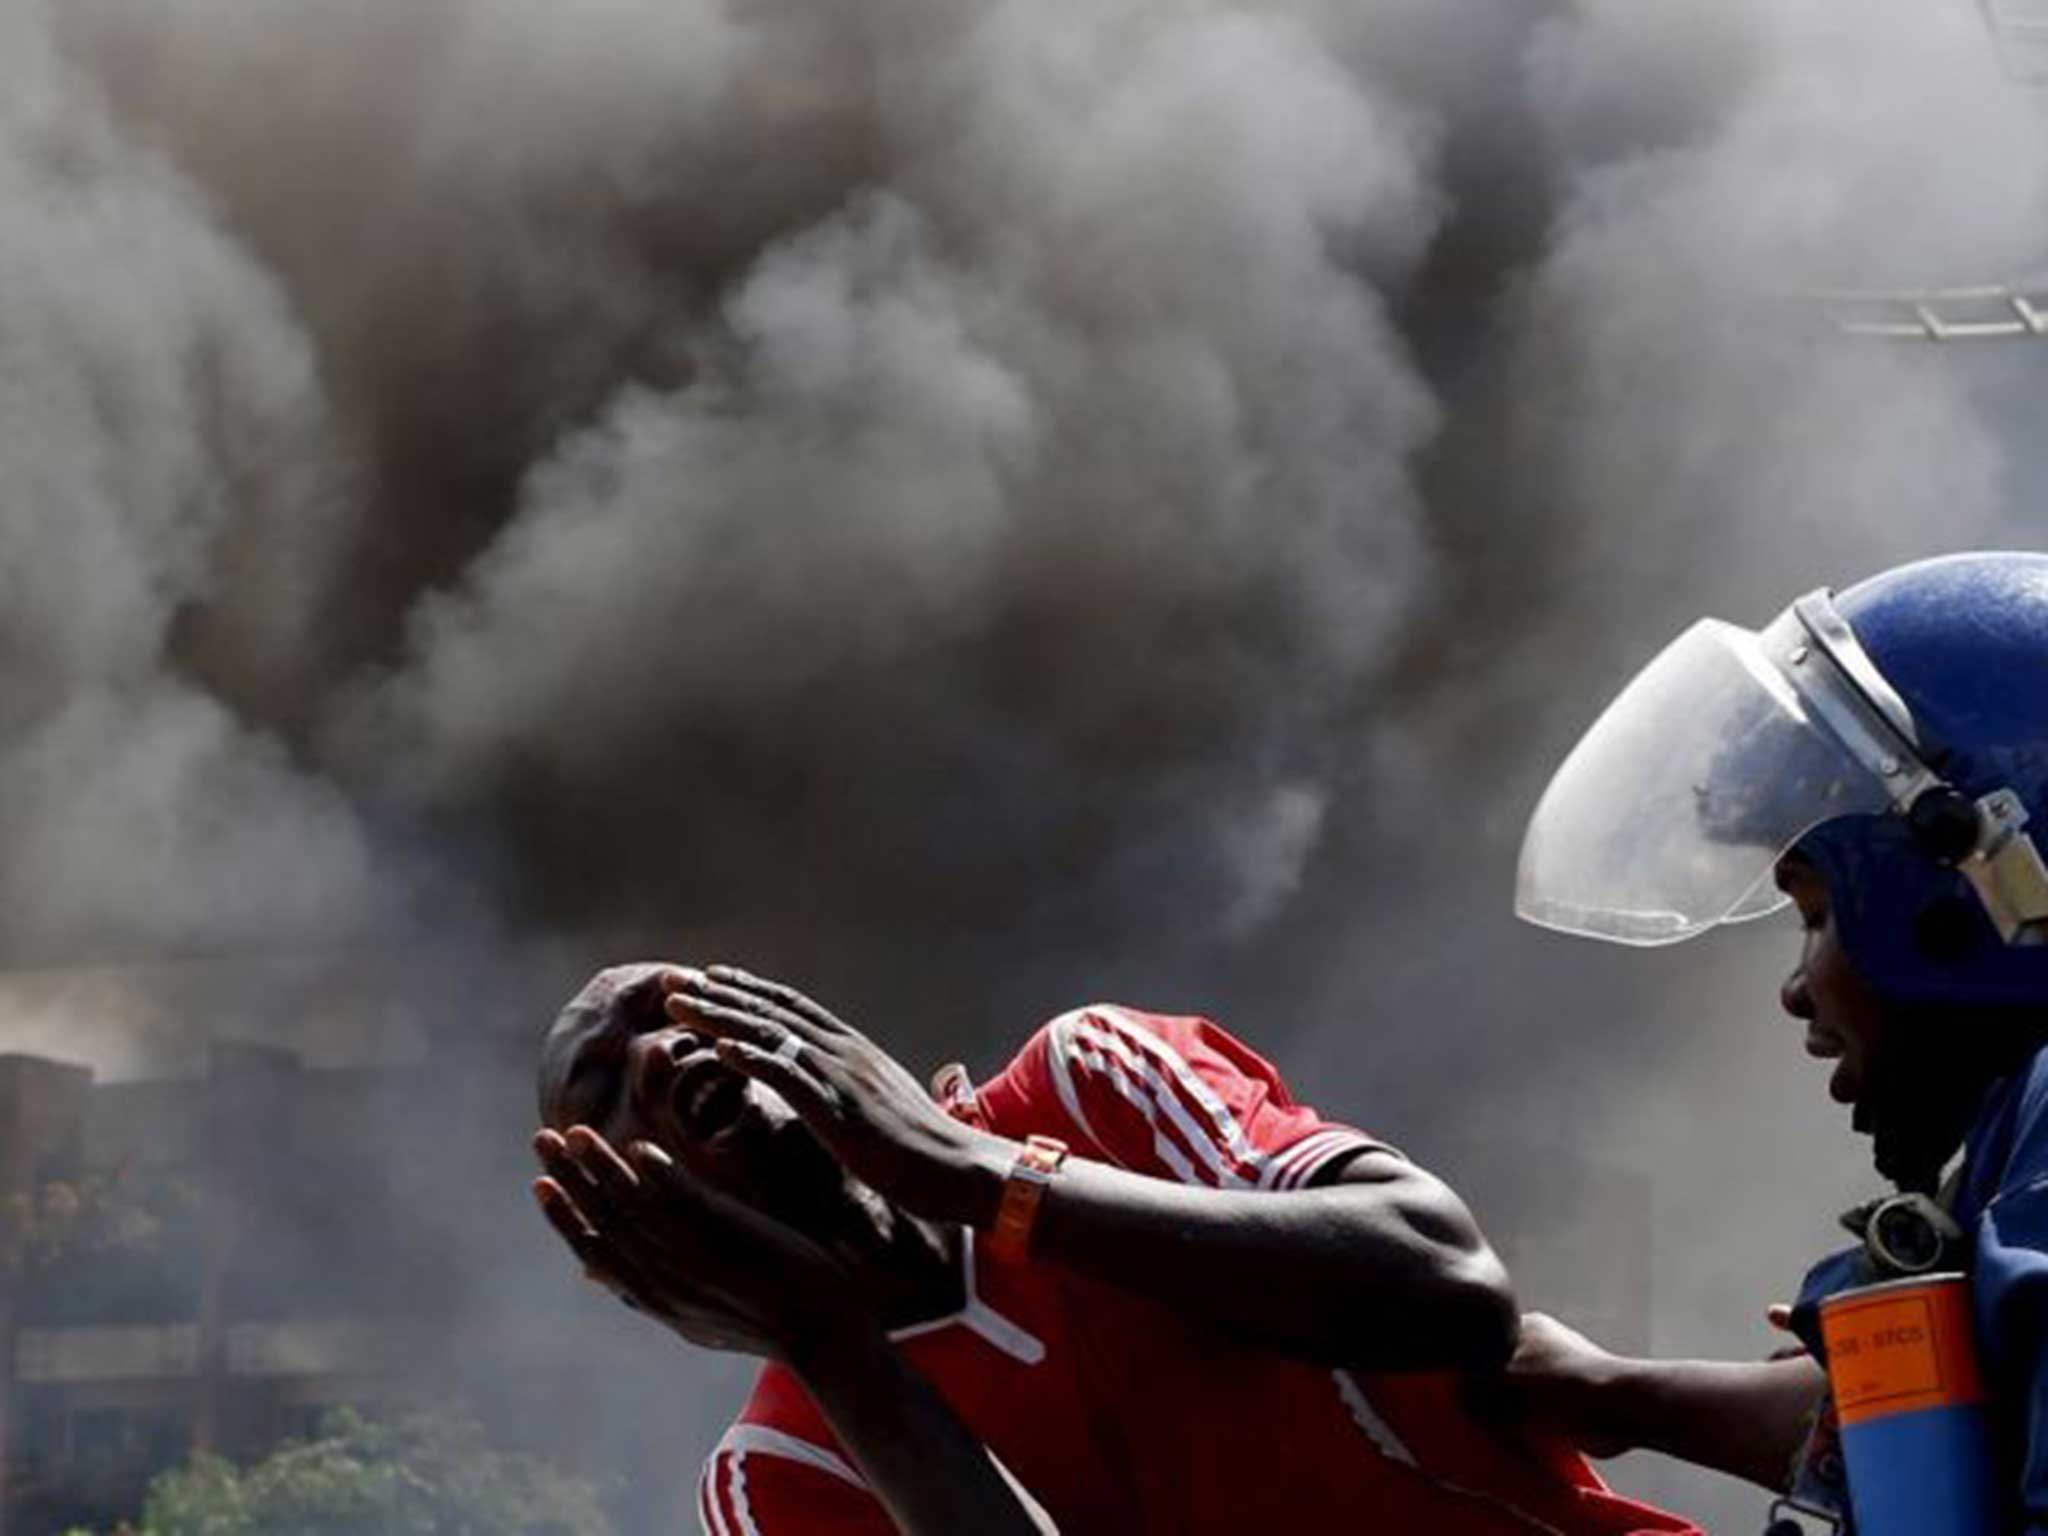 A man screams in the street as an Burundi police officer attempts to detain him